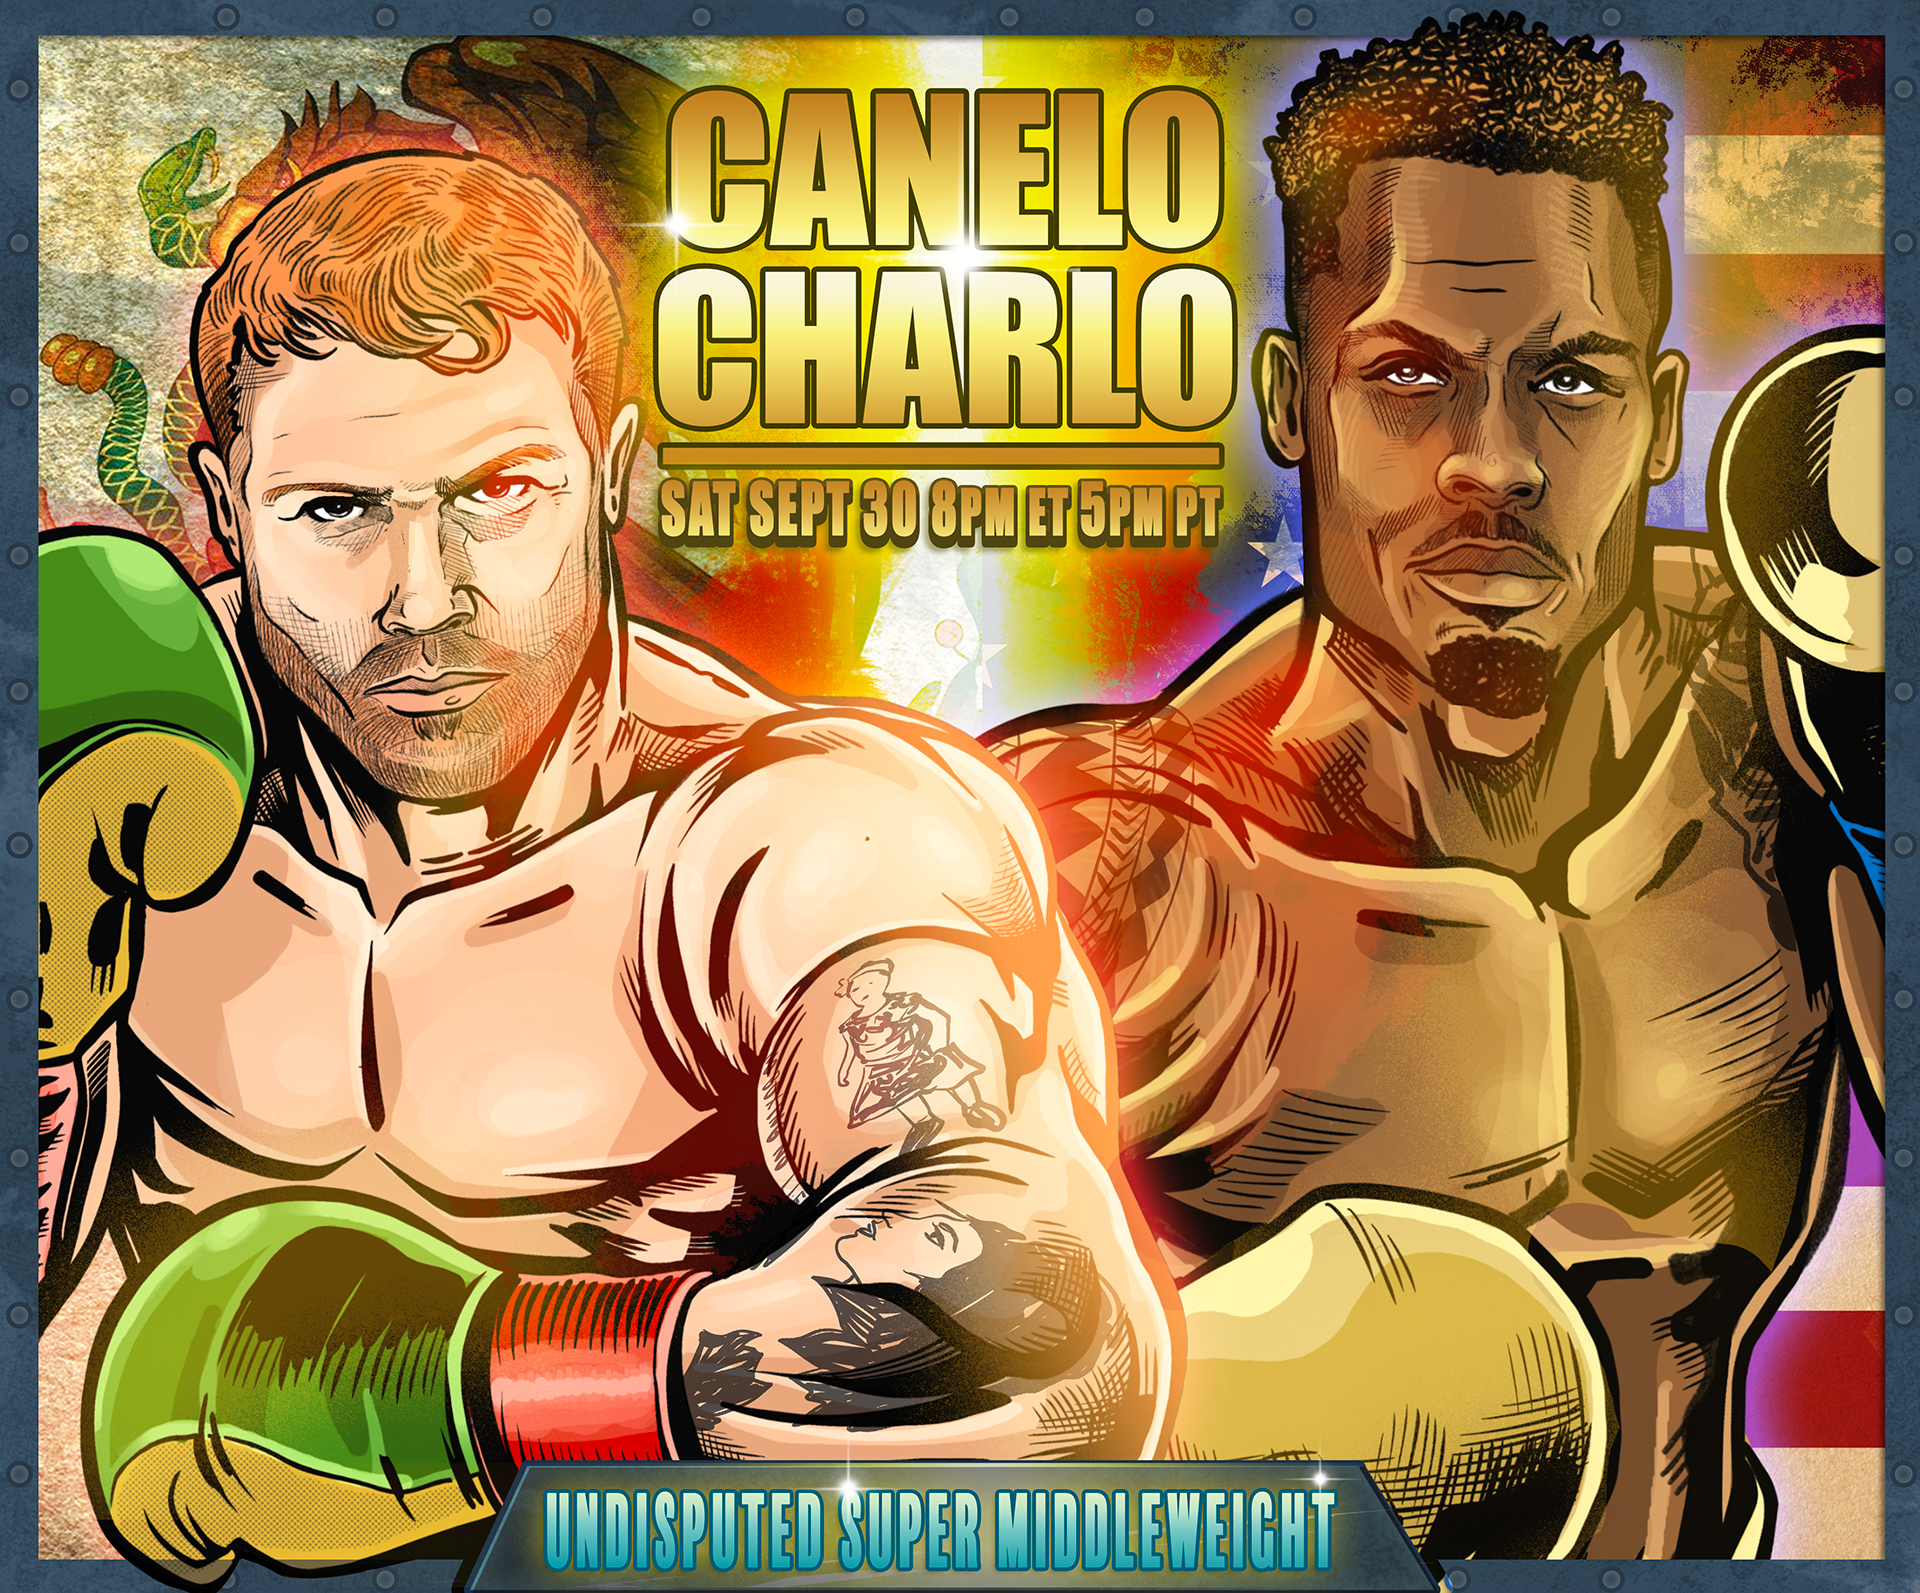 You are currently viewing Saul “Canelo” Alvarez VS Jermell Charlo